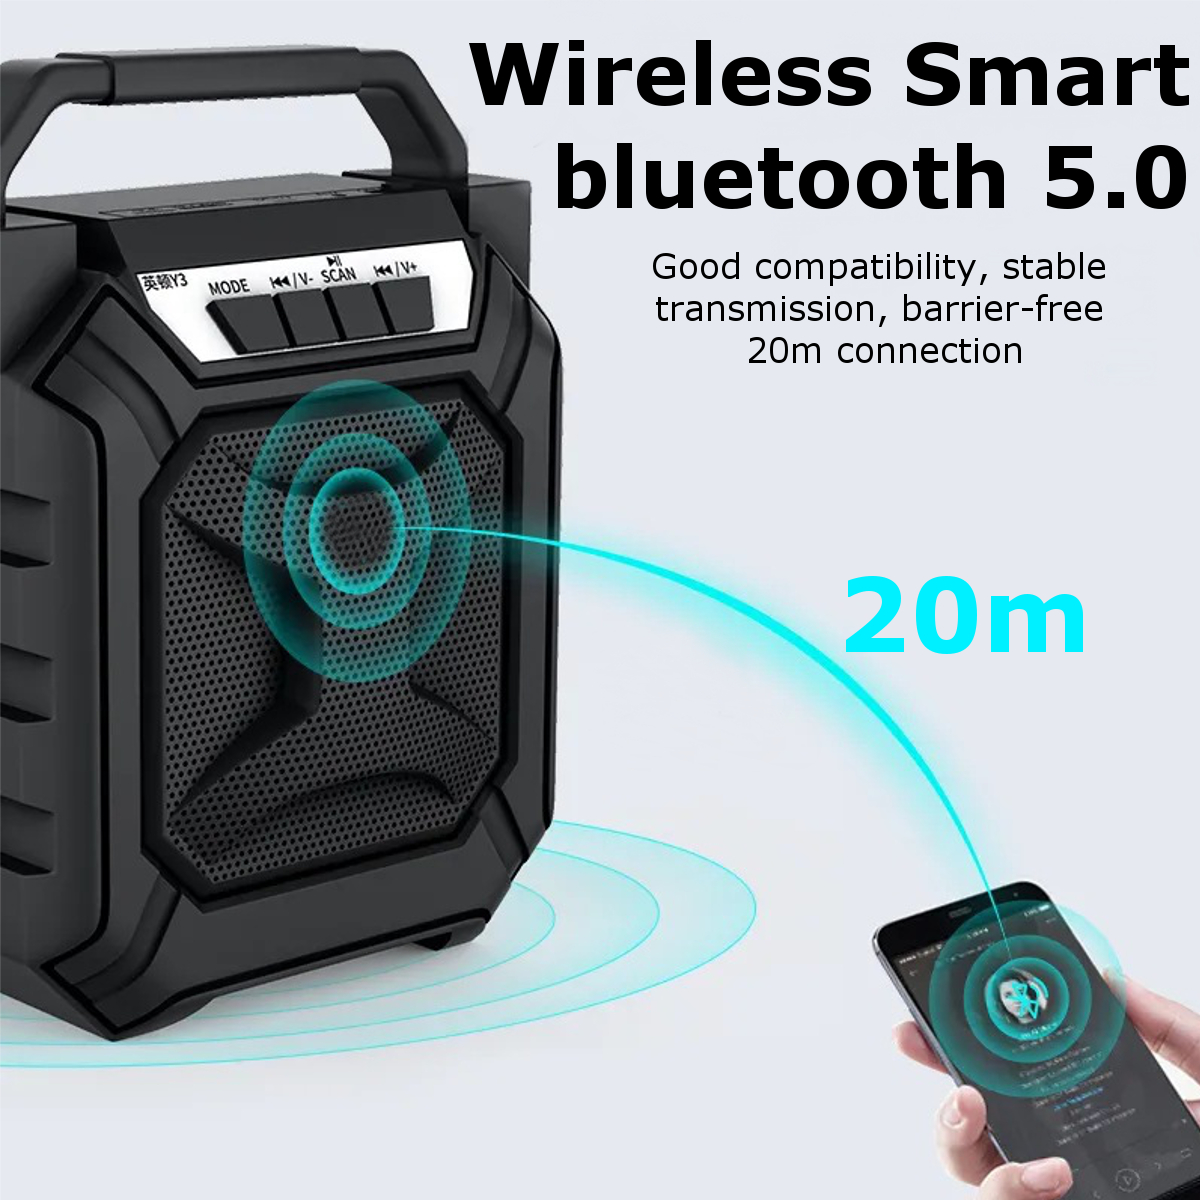 Portable-60Hz-15KHz-Bluetooth-50-Wireless-Speaker-3000mAh-Rechargeable-High-power-Subwoofer-Support--1717424-4